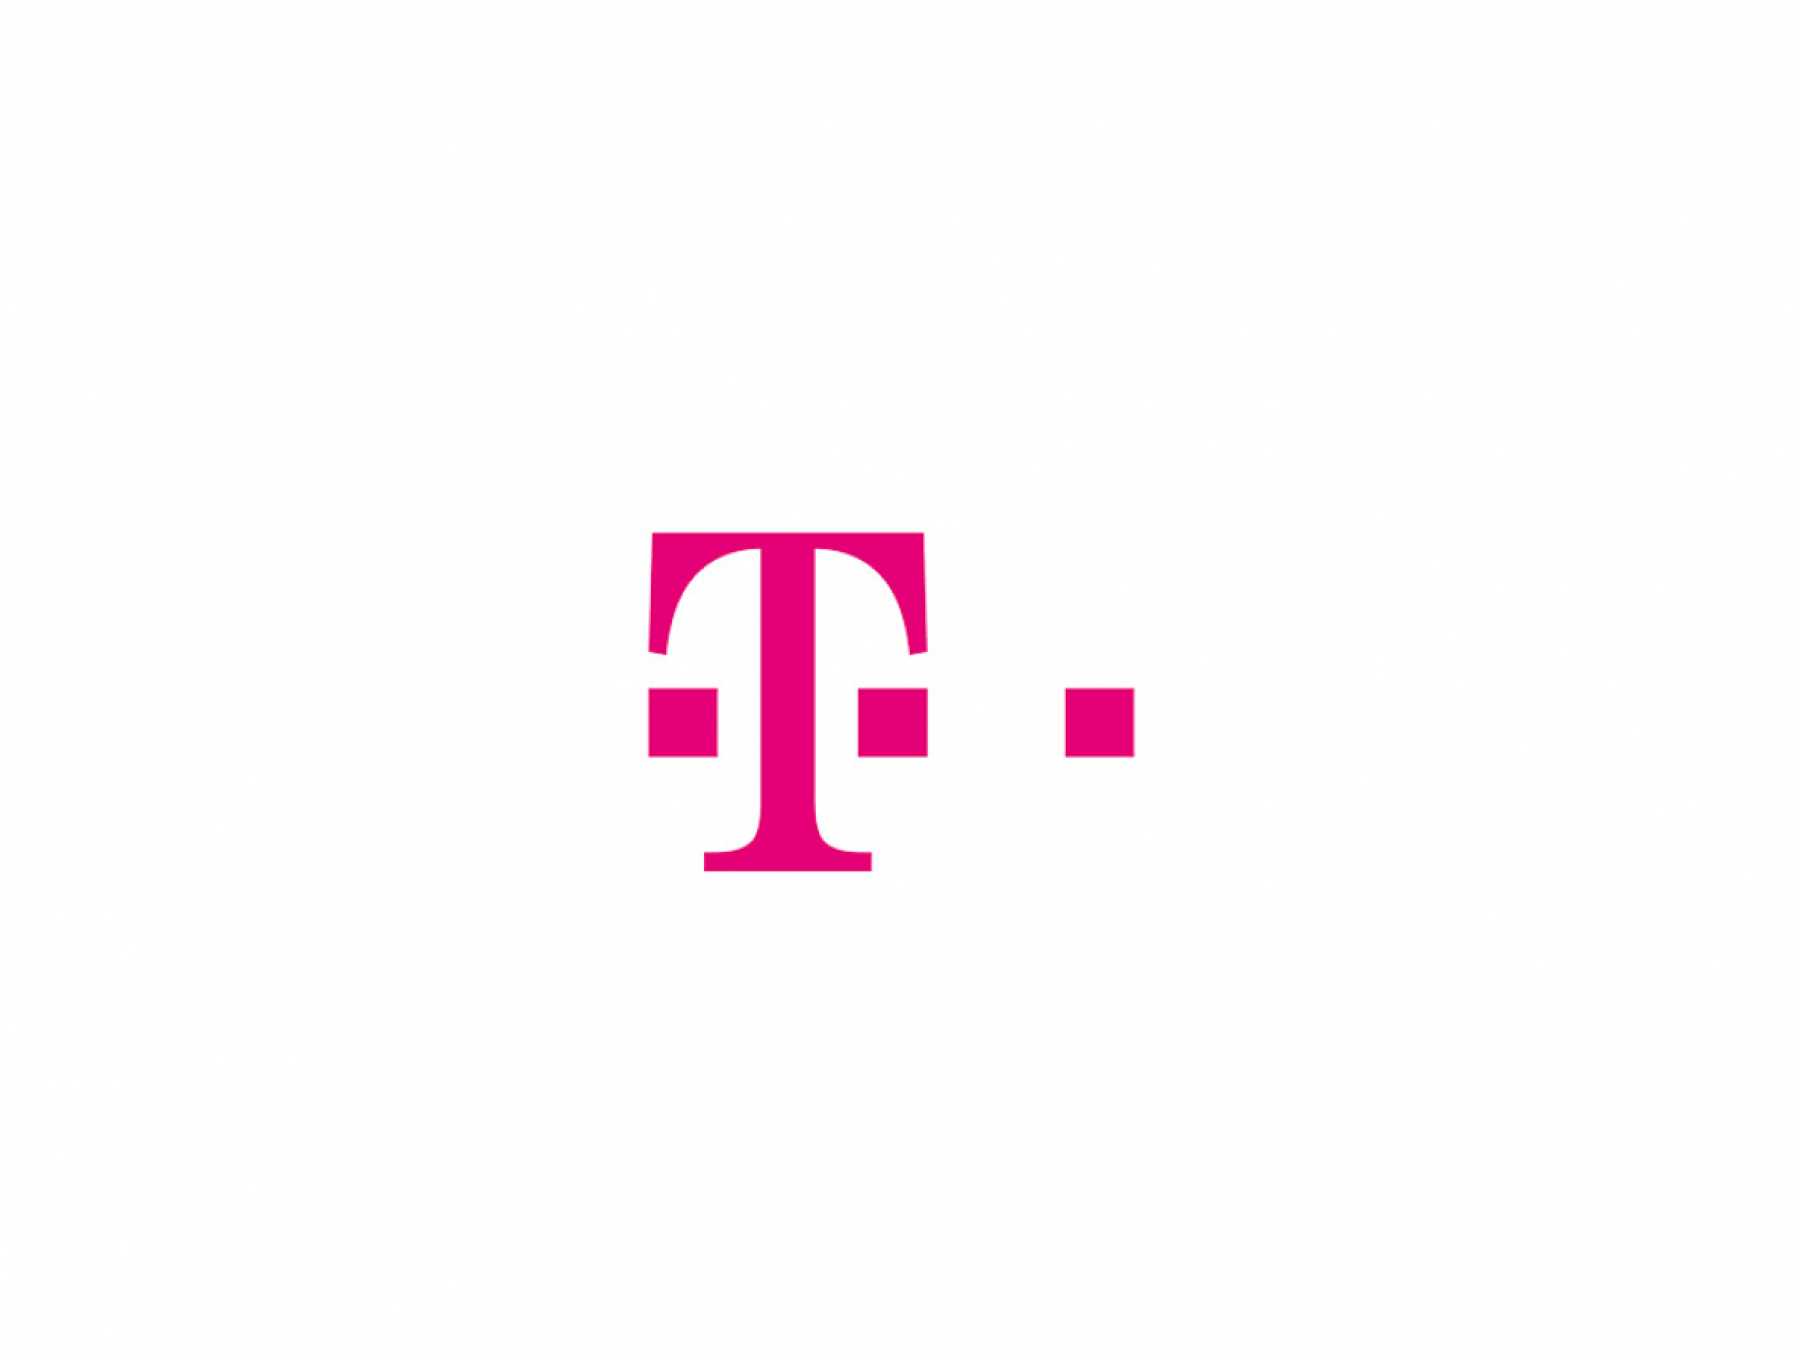 Telekom Romania closes the selling transaction for the land in Floreasca area in Bucharest